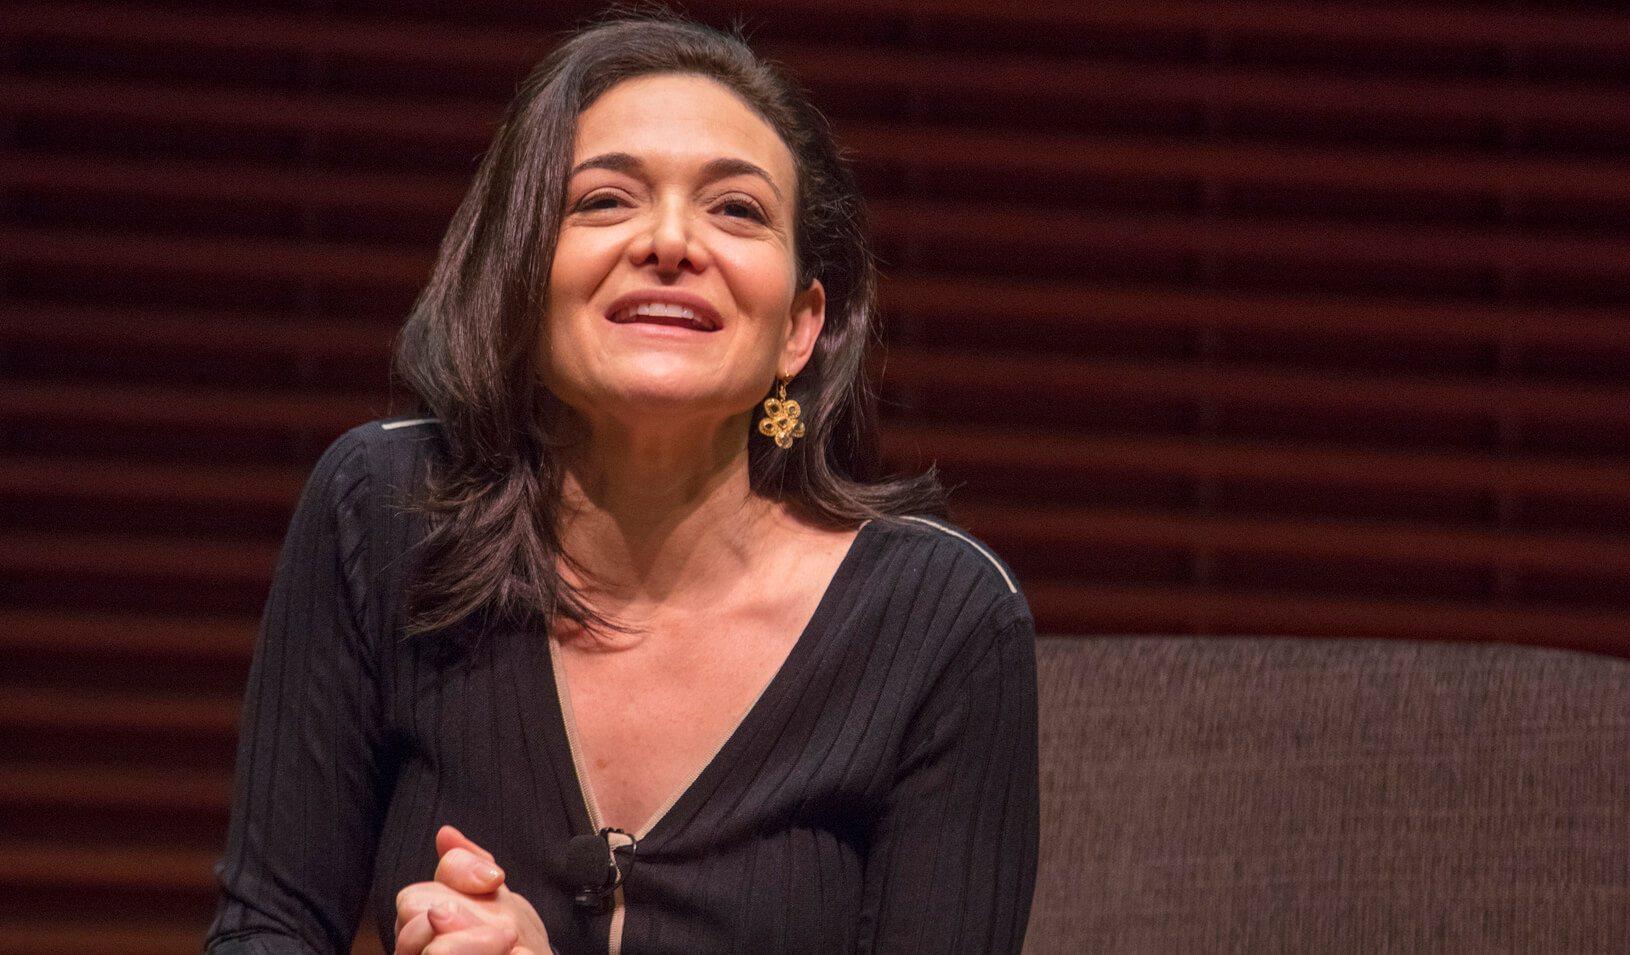 Sheryl Sandberg’s META Exit Comes During An Internal Probe Of Her Alleged Misuse Of Funds